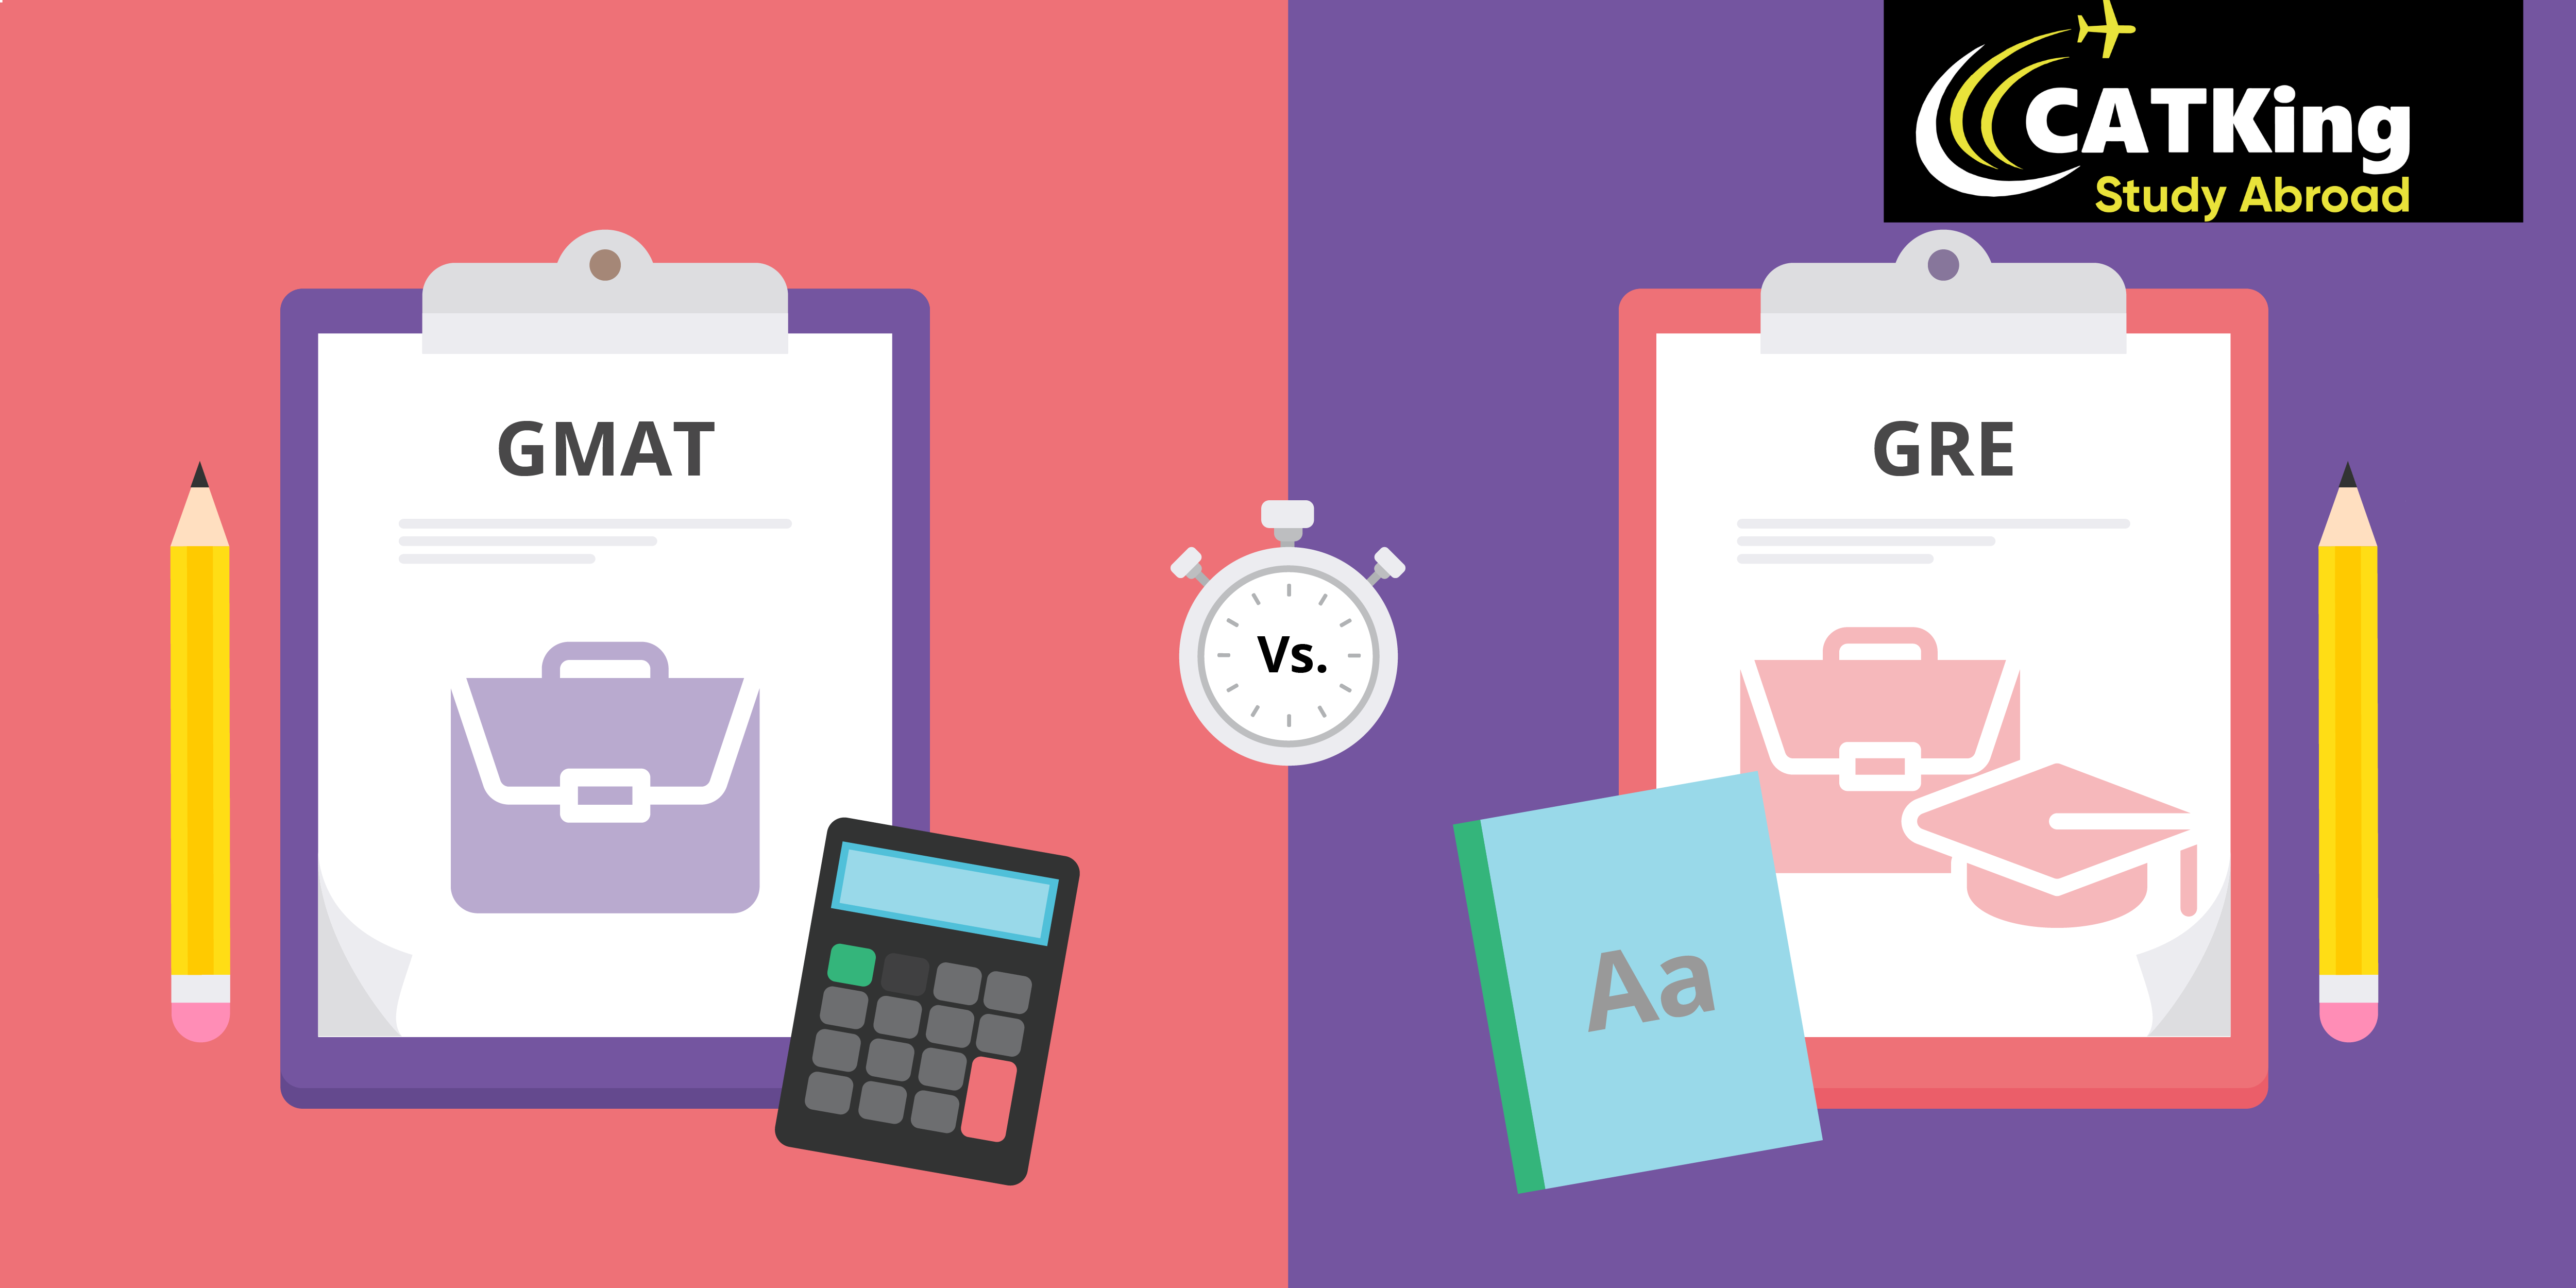 What you should take: GRE or GMAT?